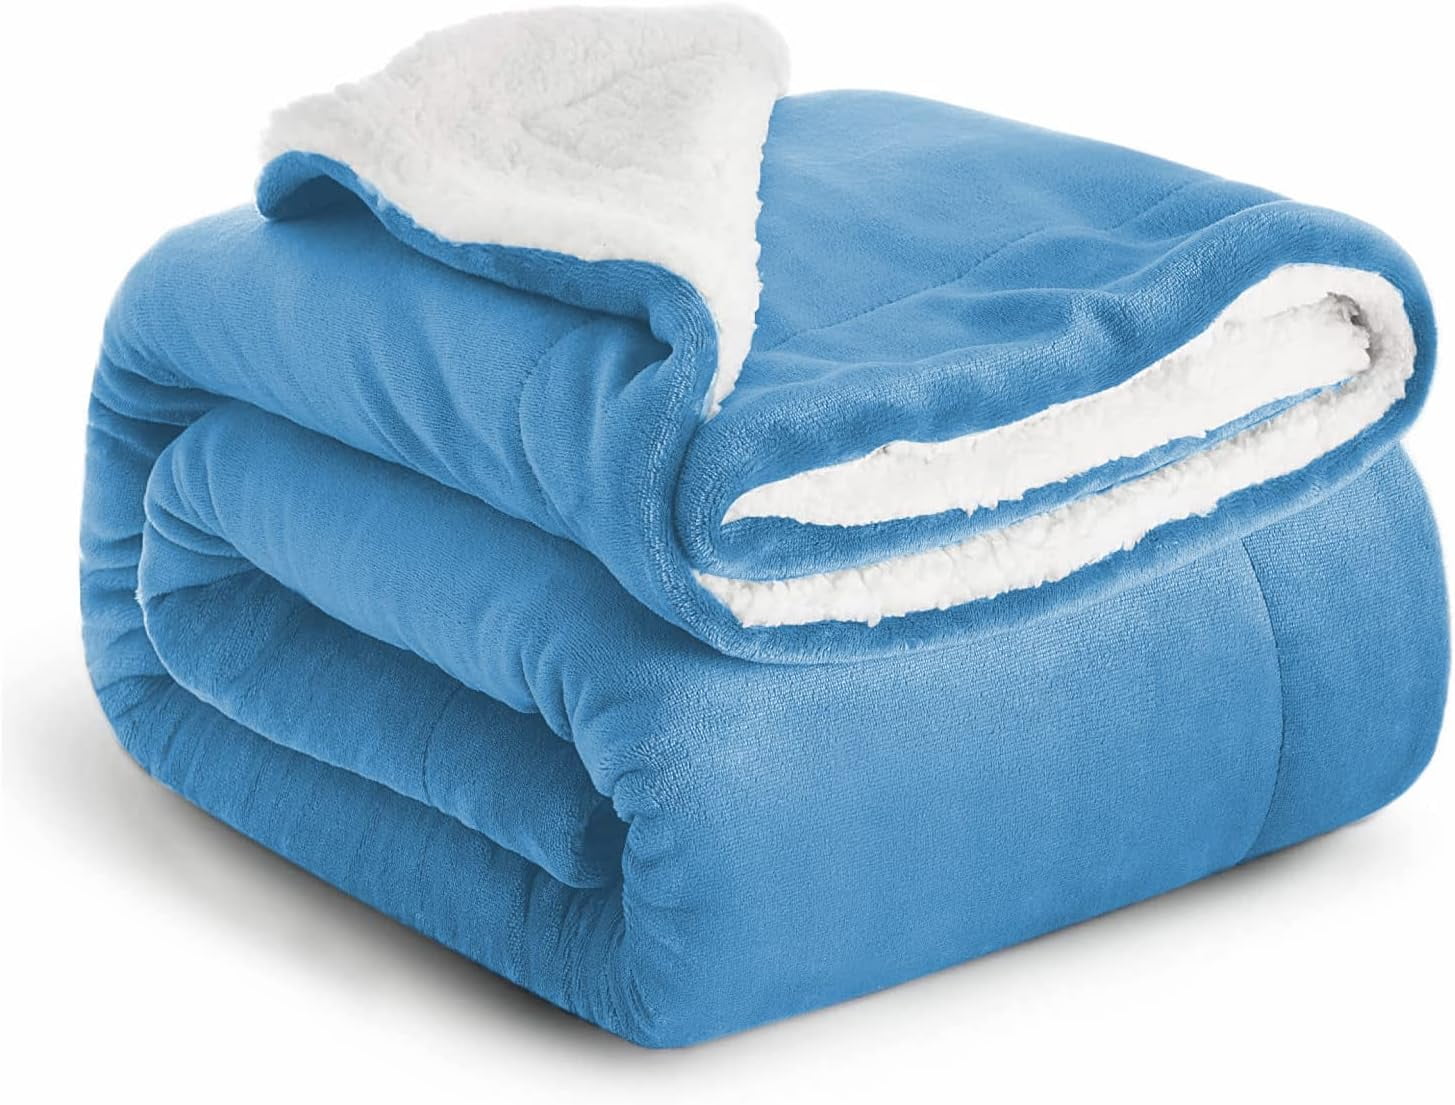 IR Imperial Rooms Sherpa Blanket and Throw Fluffy, Soft, Bed Blanket ...